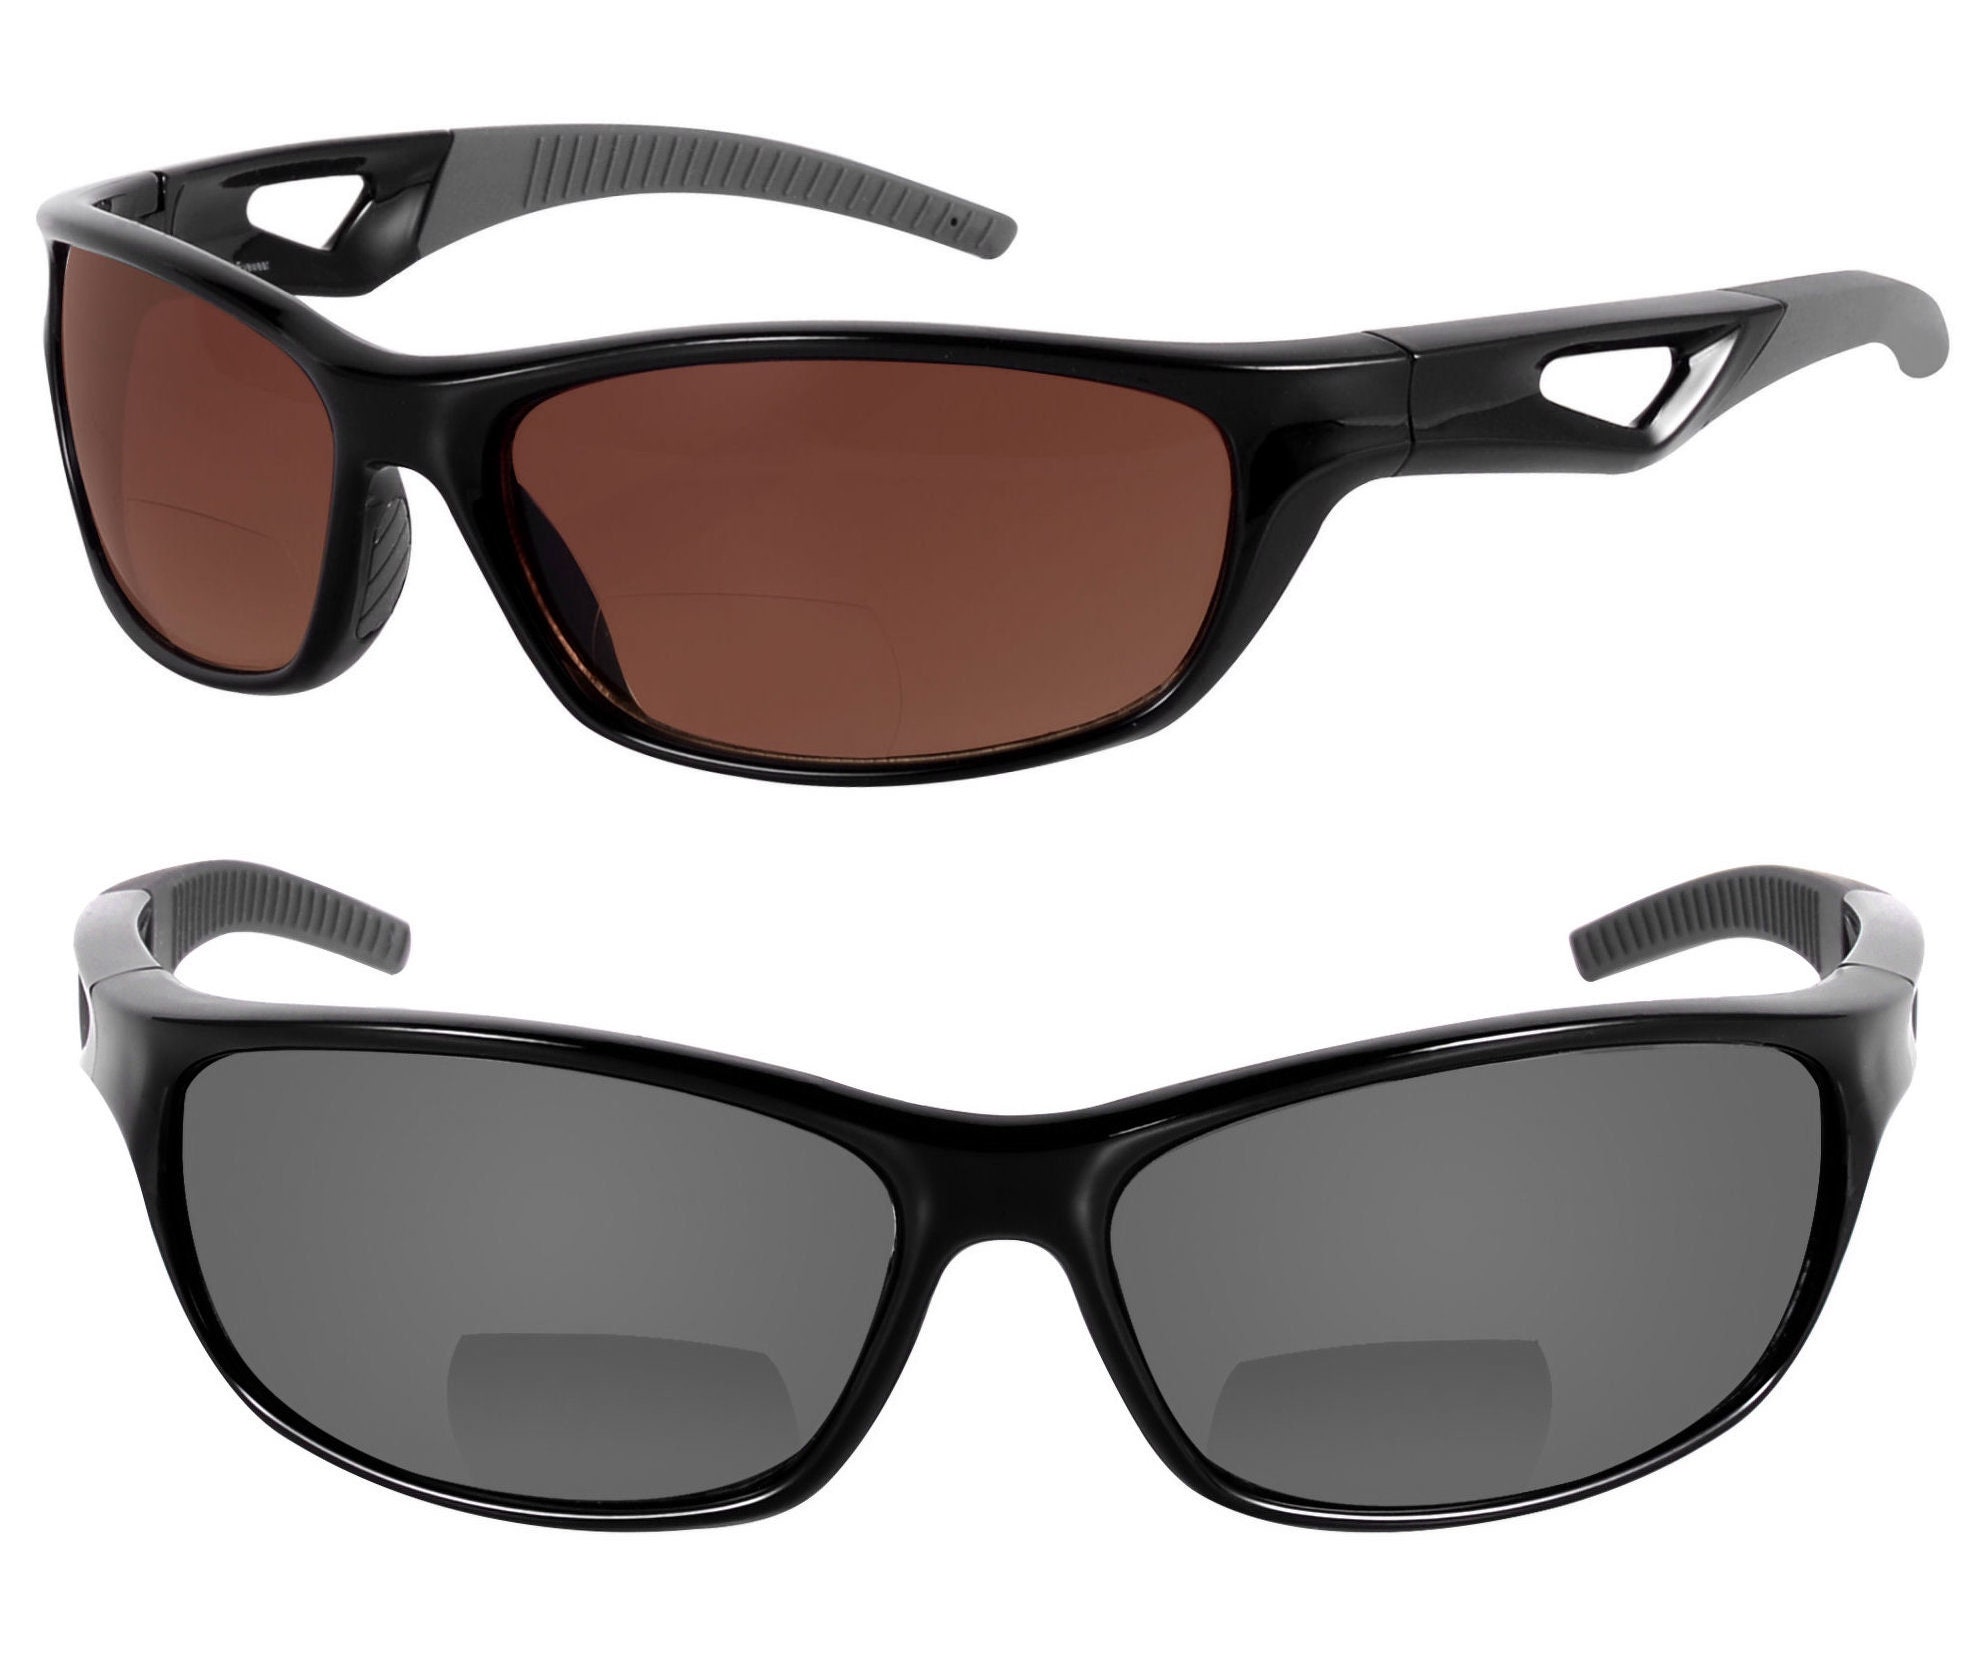 The Driver” Polarized Bifocal Sunglasses Featuring High Definition